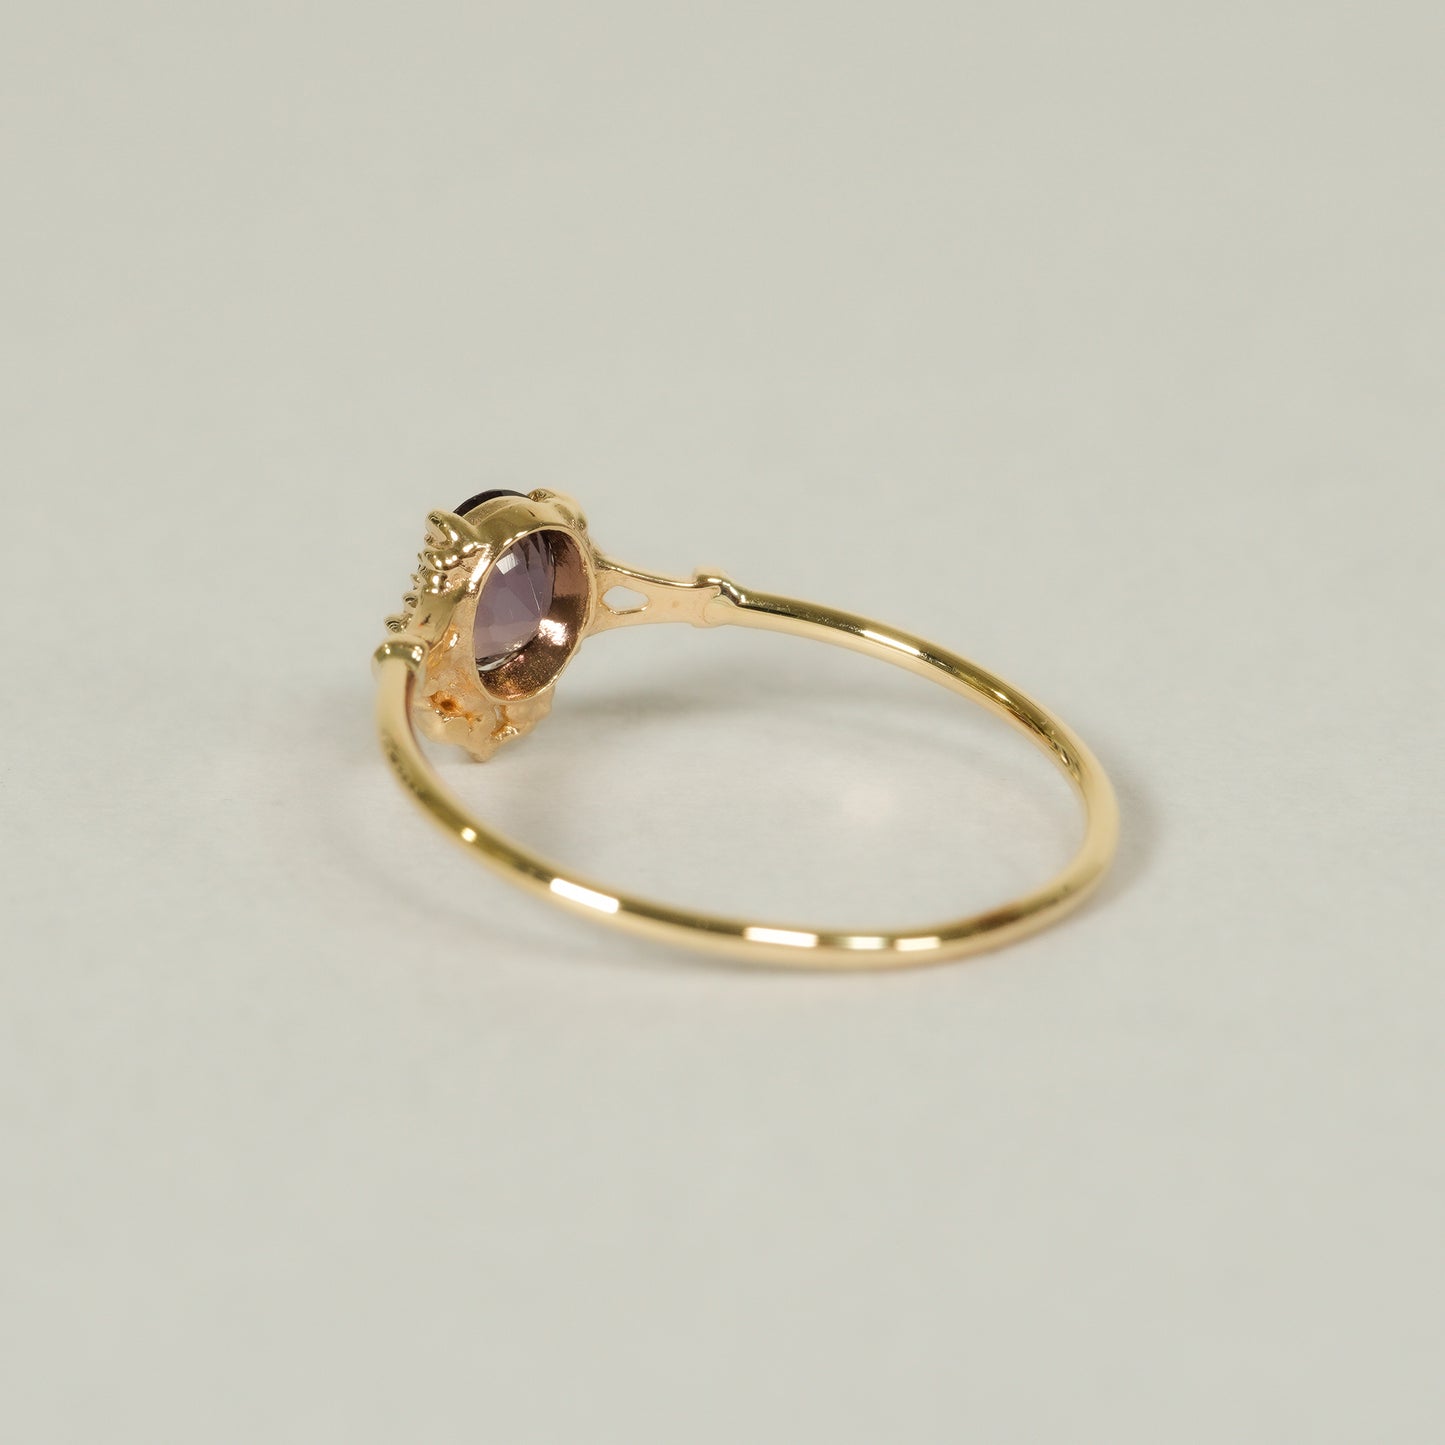 1485 Purple Spinel / Ring